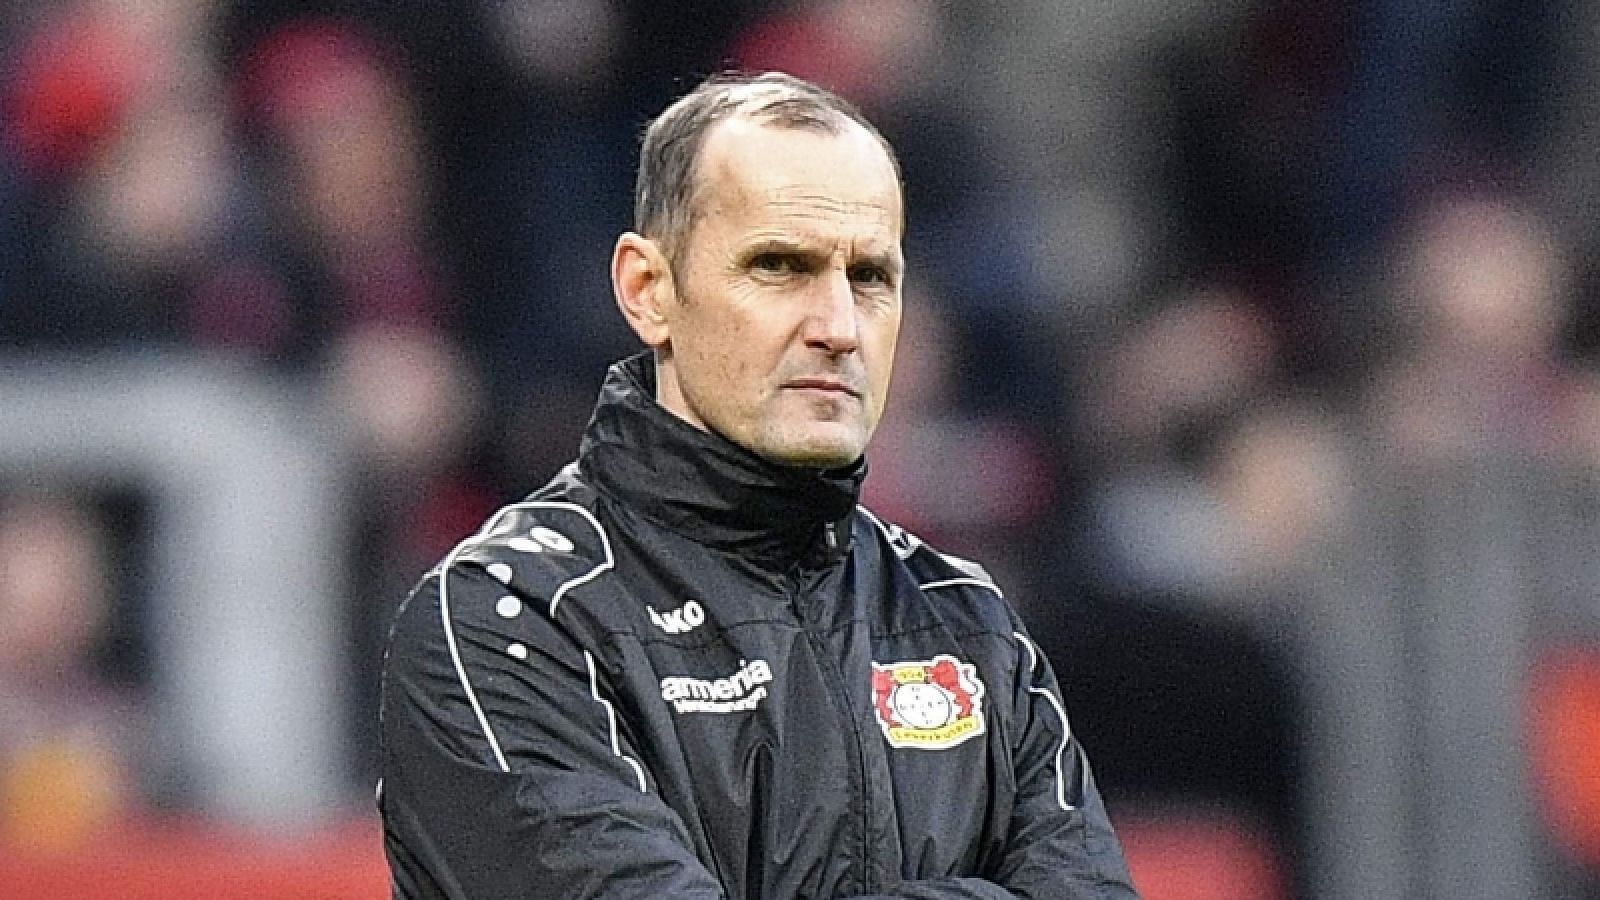 Heiko Herrlich will miss his club Augsburg’s game this weekend after breaking the quarantine rules.